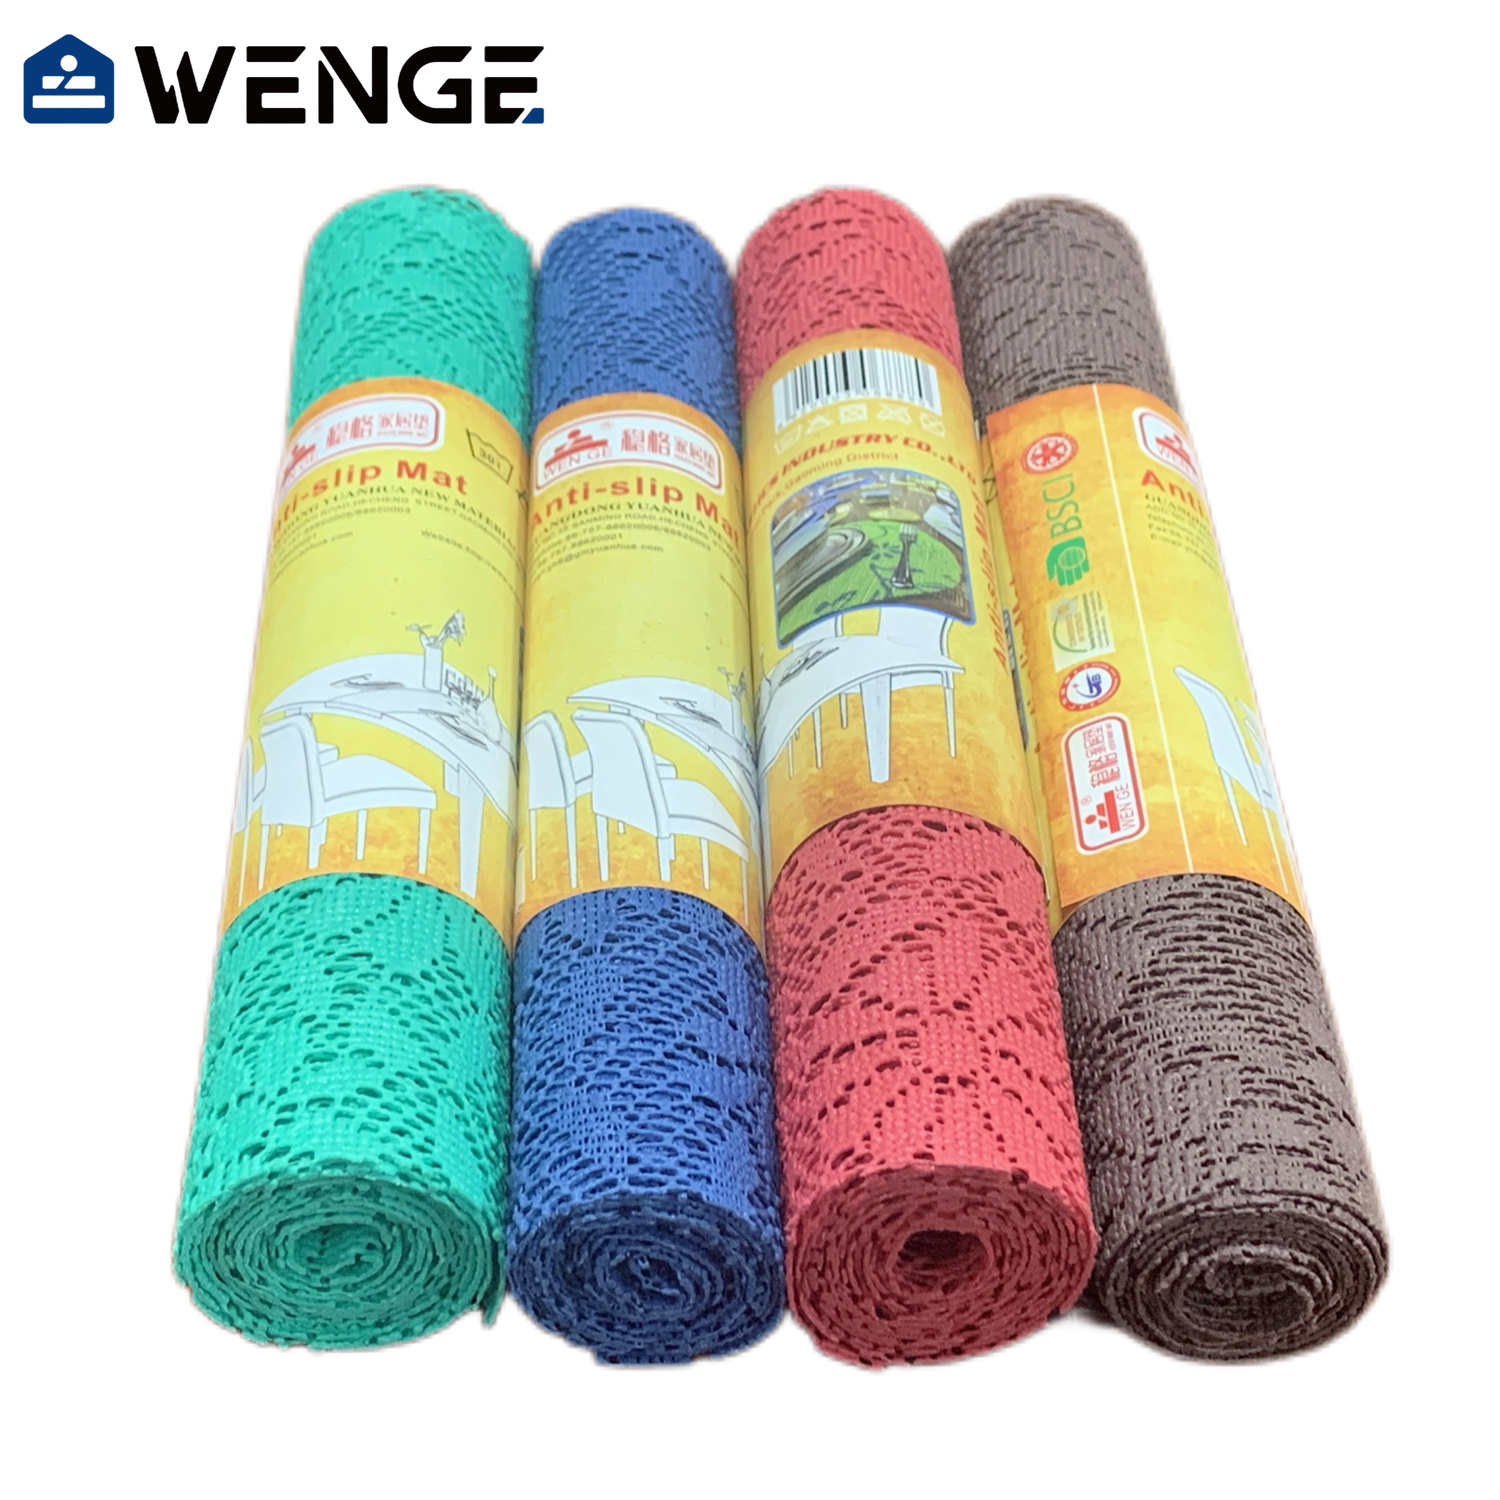 High Quality Reusable Various Color PVC Grip Mat, Shelf Liners for Kitchen Cabinets